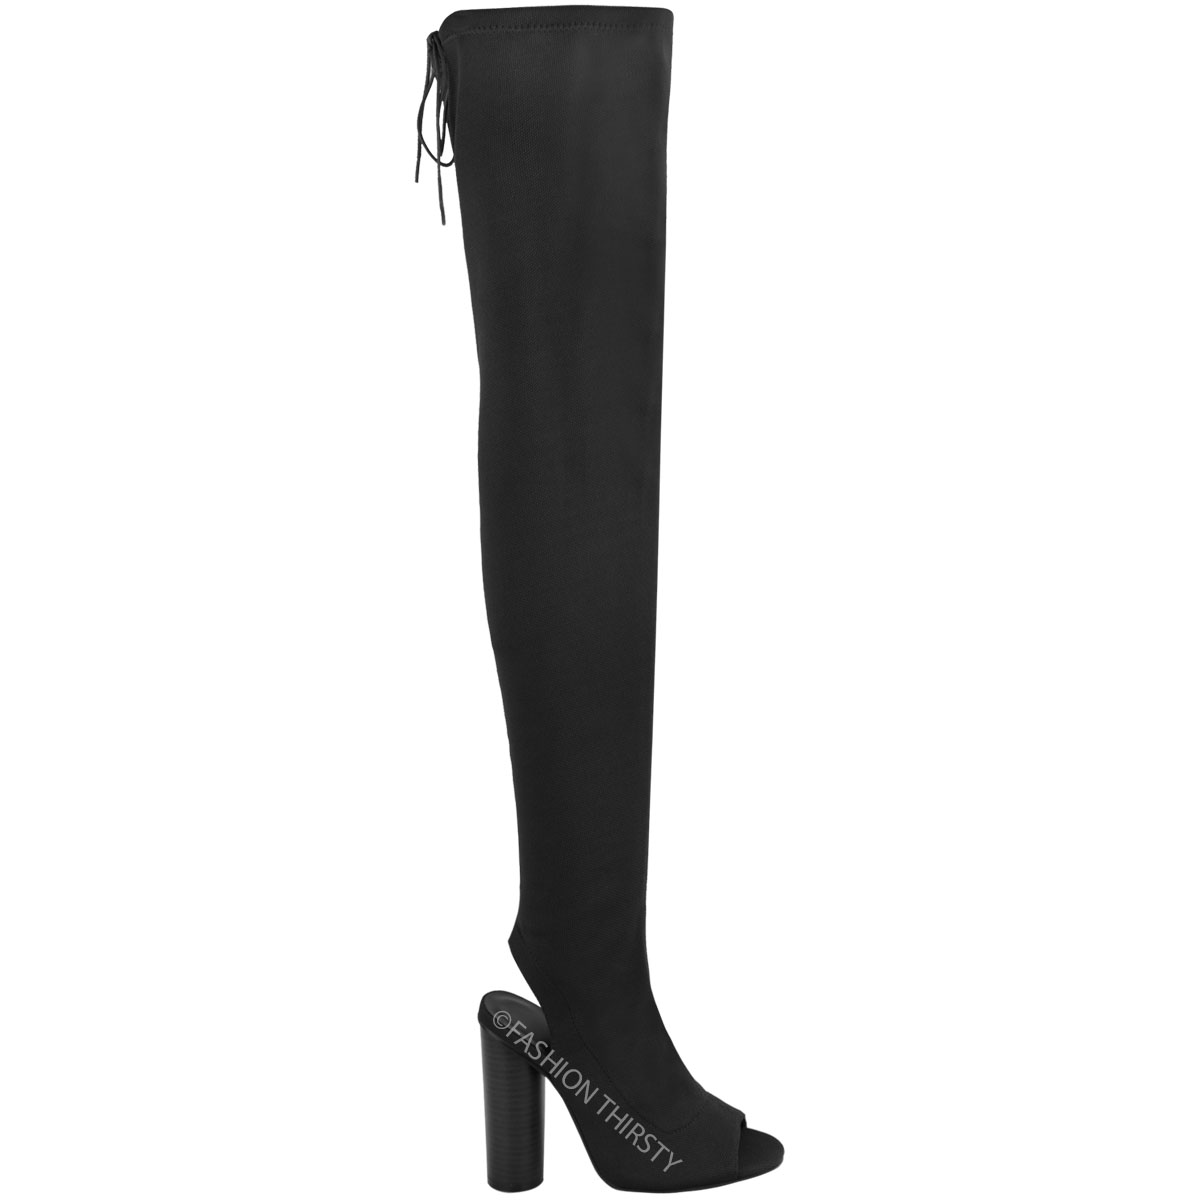 WOMENS LADIES THIGH HIGH KNIT STRETCH OVER THE KNEE CELEB BLOCK HEELS BOOTS SIZE 